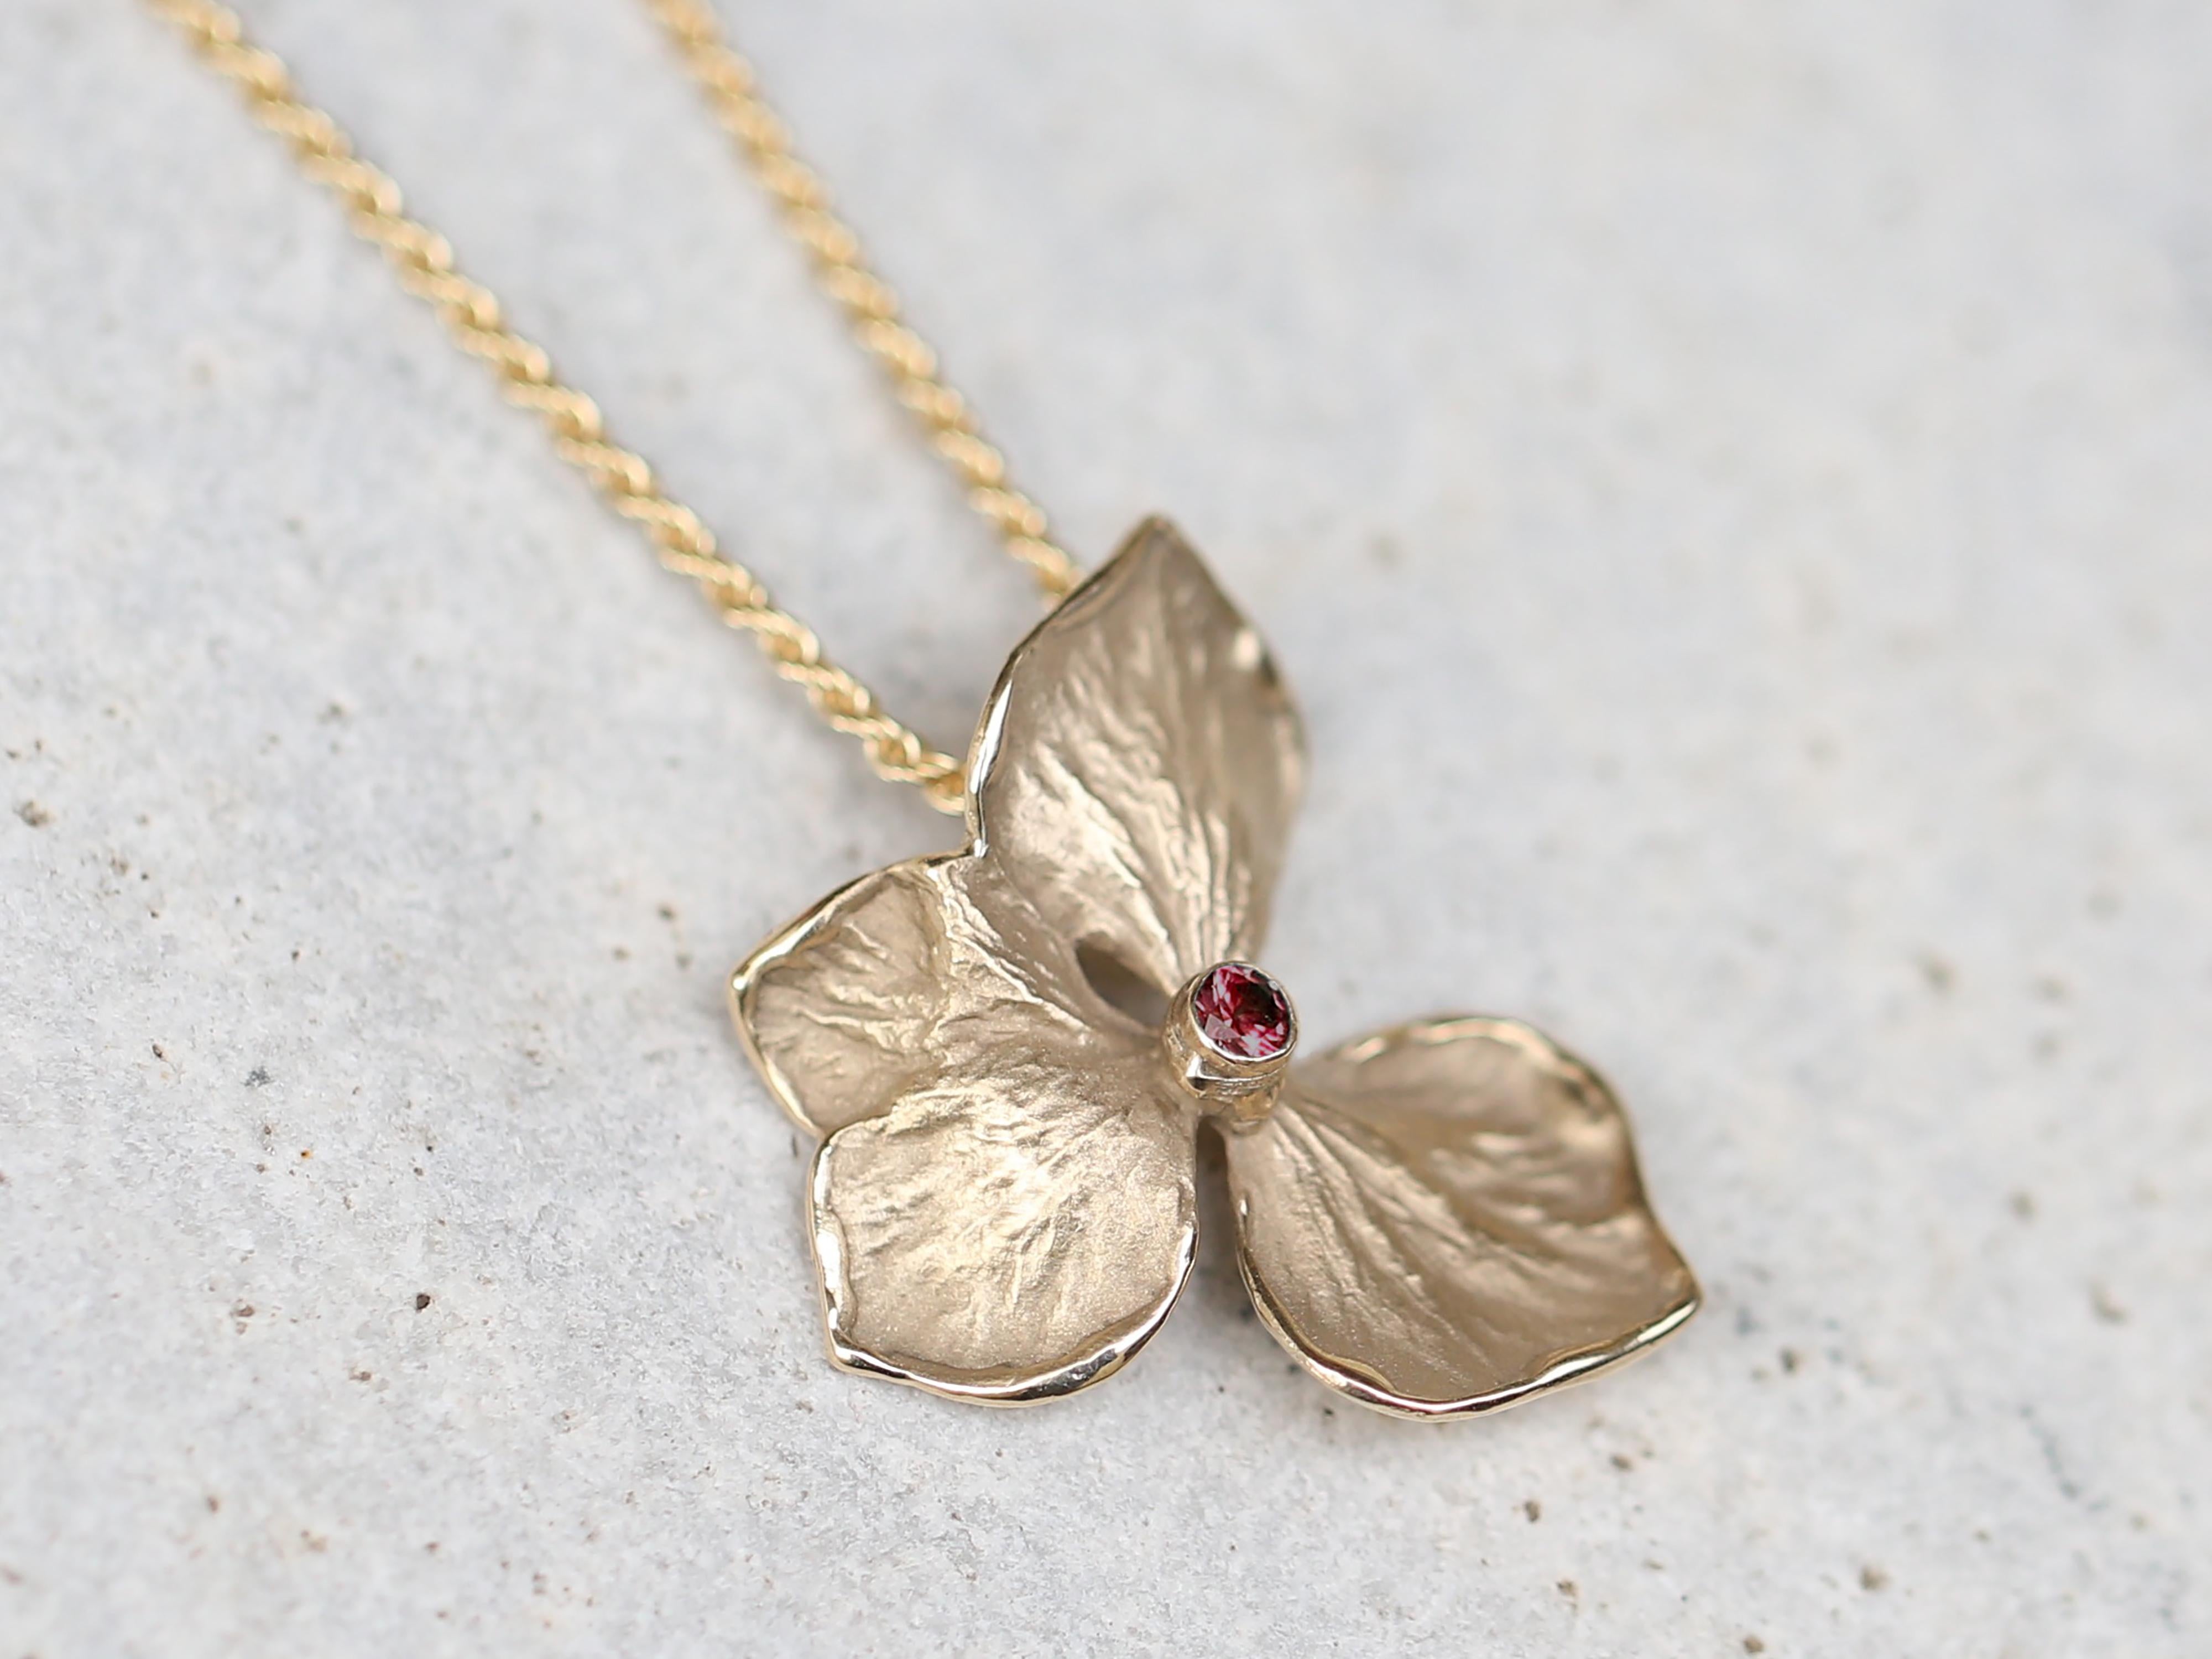 Brilliant Cut Hydrangea Flower Necklace, Solid 14k and 18k Yellow Gold, Ruby For Sale